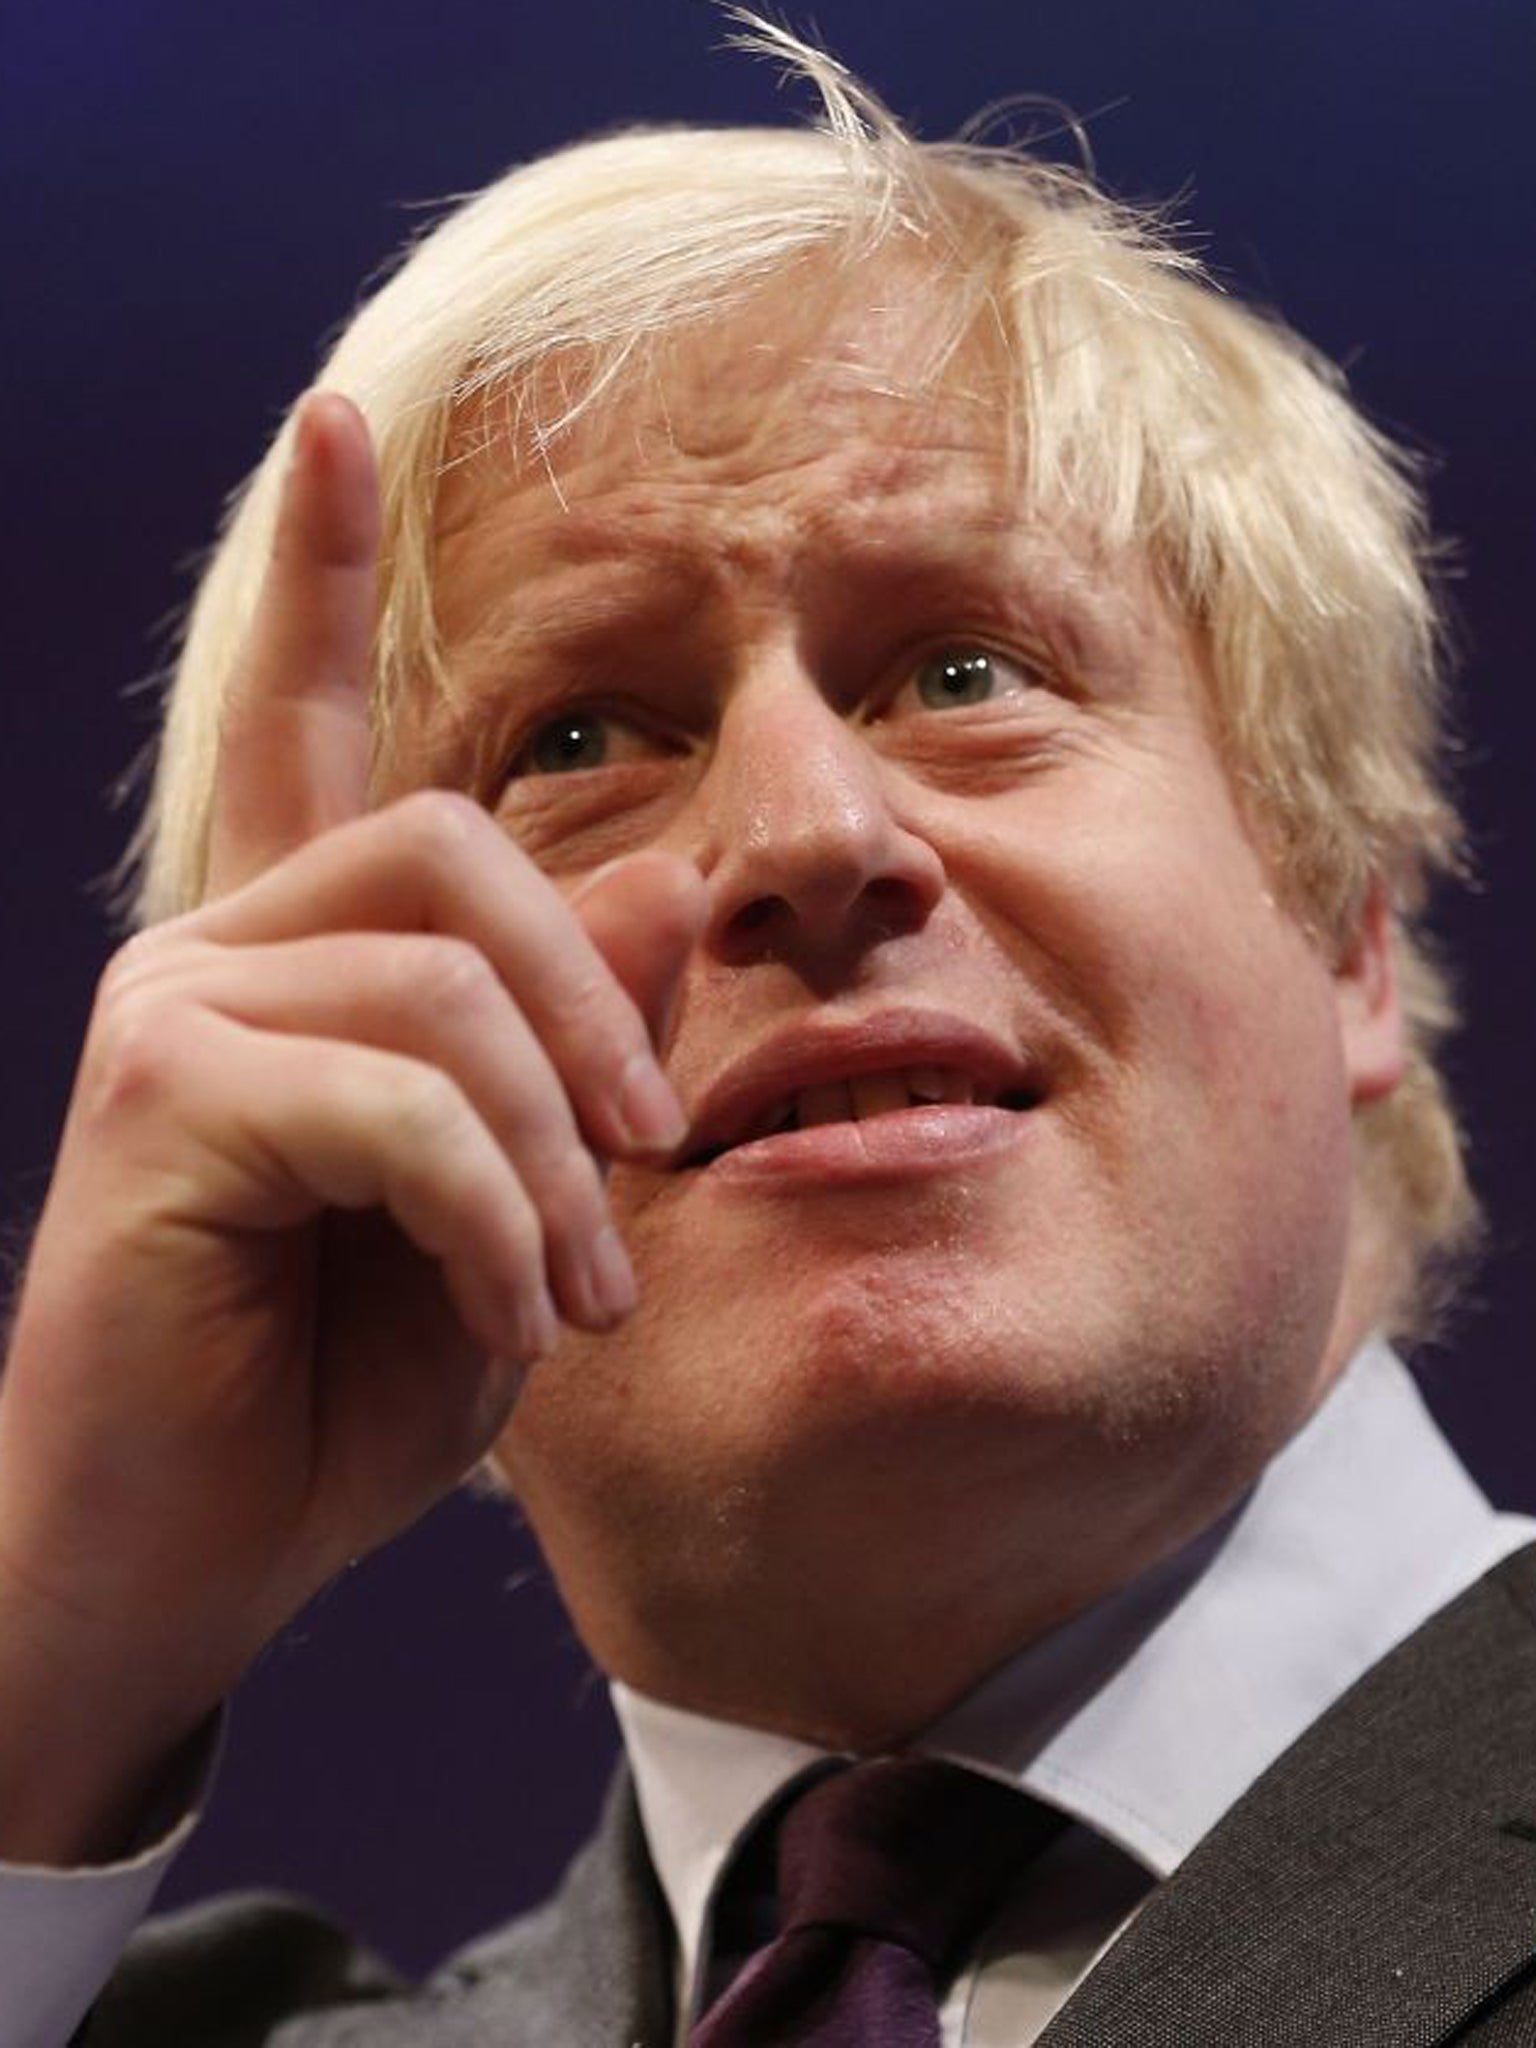 Guests at The Spectator's annual political awards were told the Mayor of London, a former editor of the magazine, scooped the top accolade for breaking the Conservatives' electoral curse